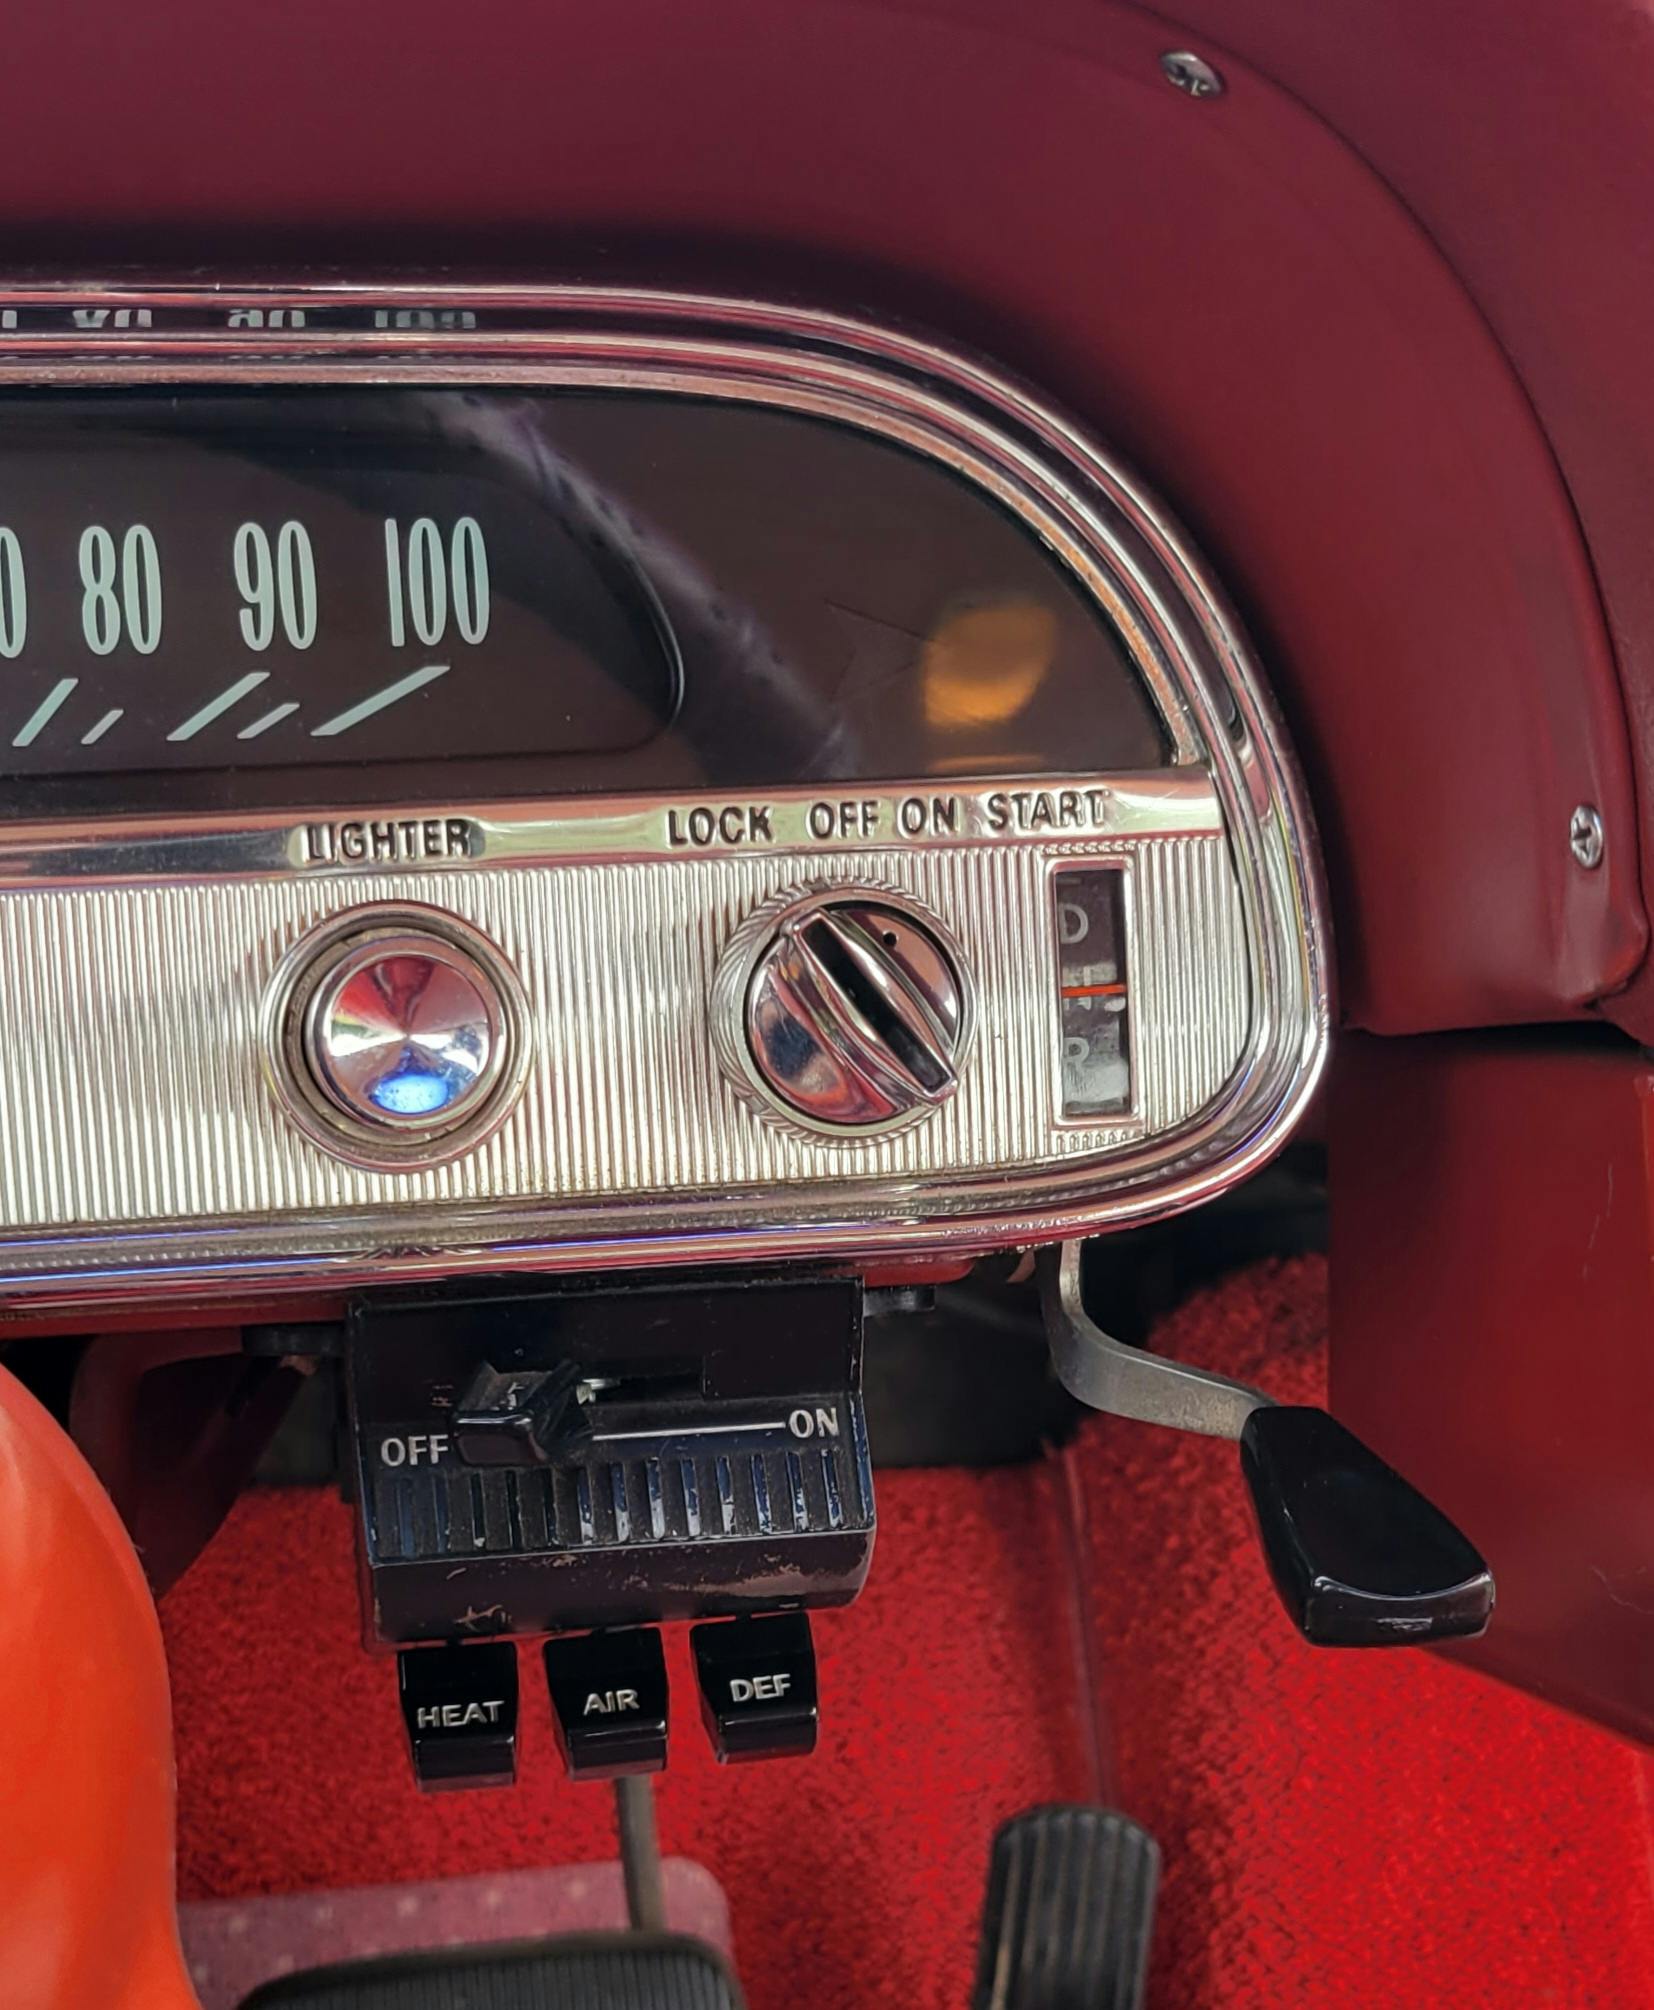 1964 Chevrolet Corvair Monza 900 ignition